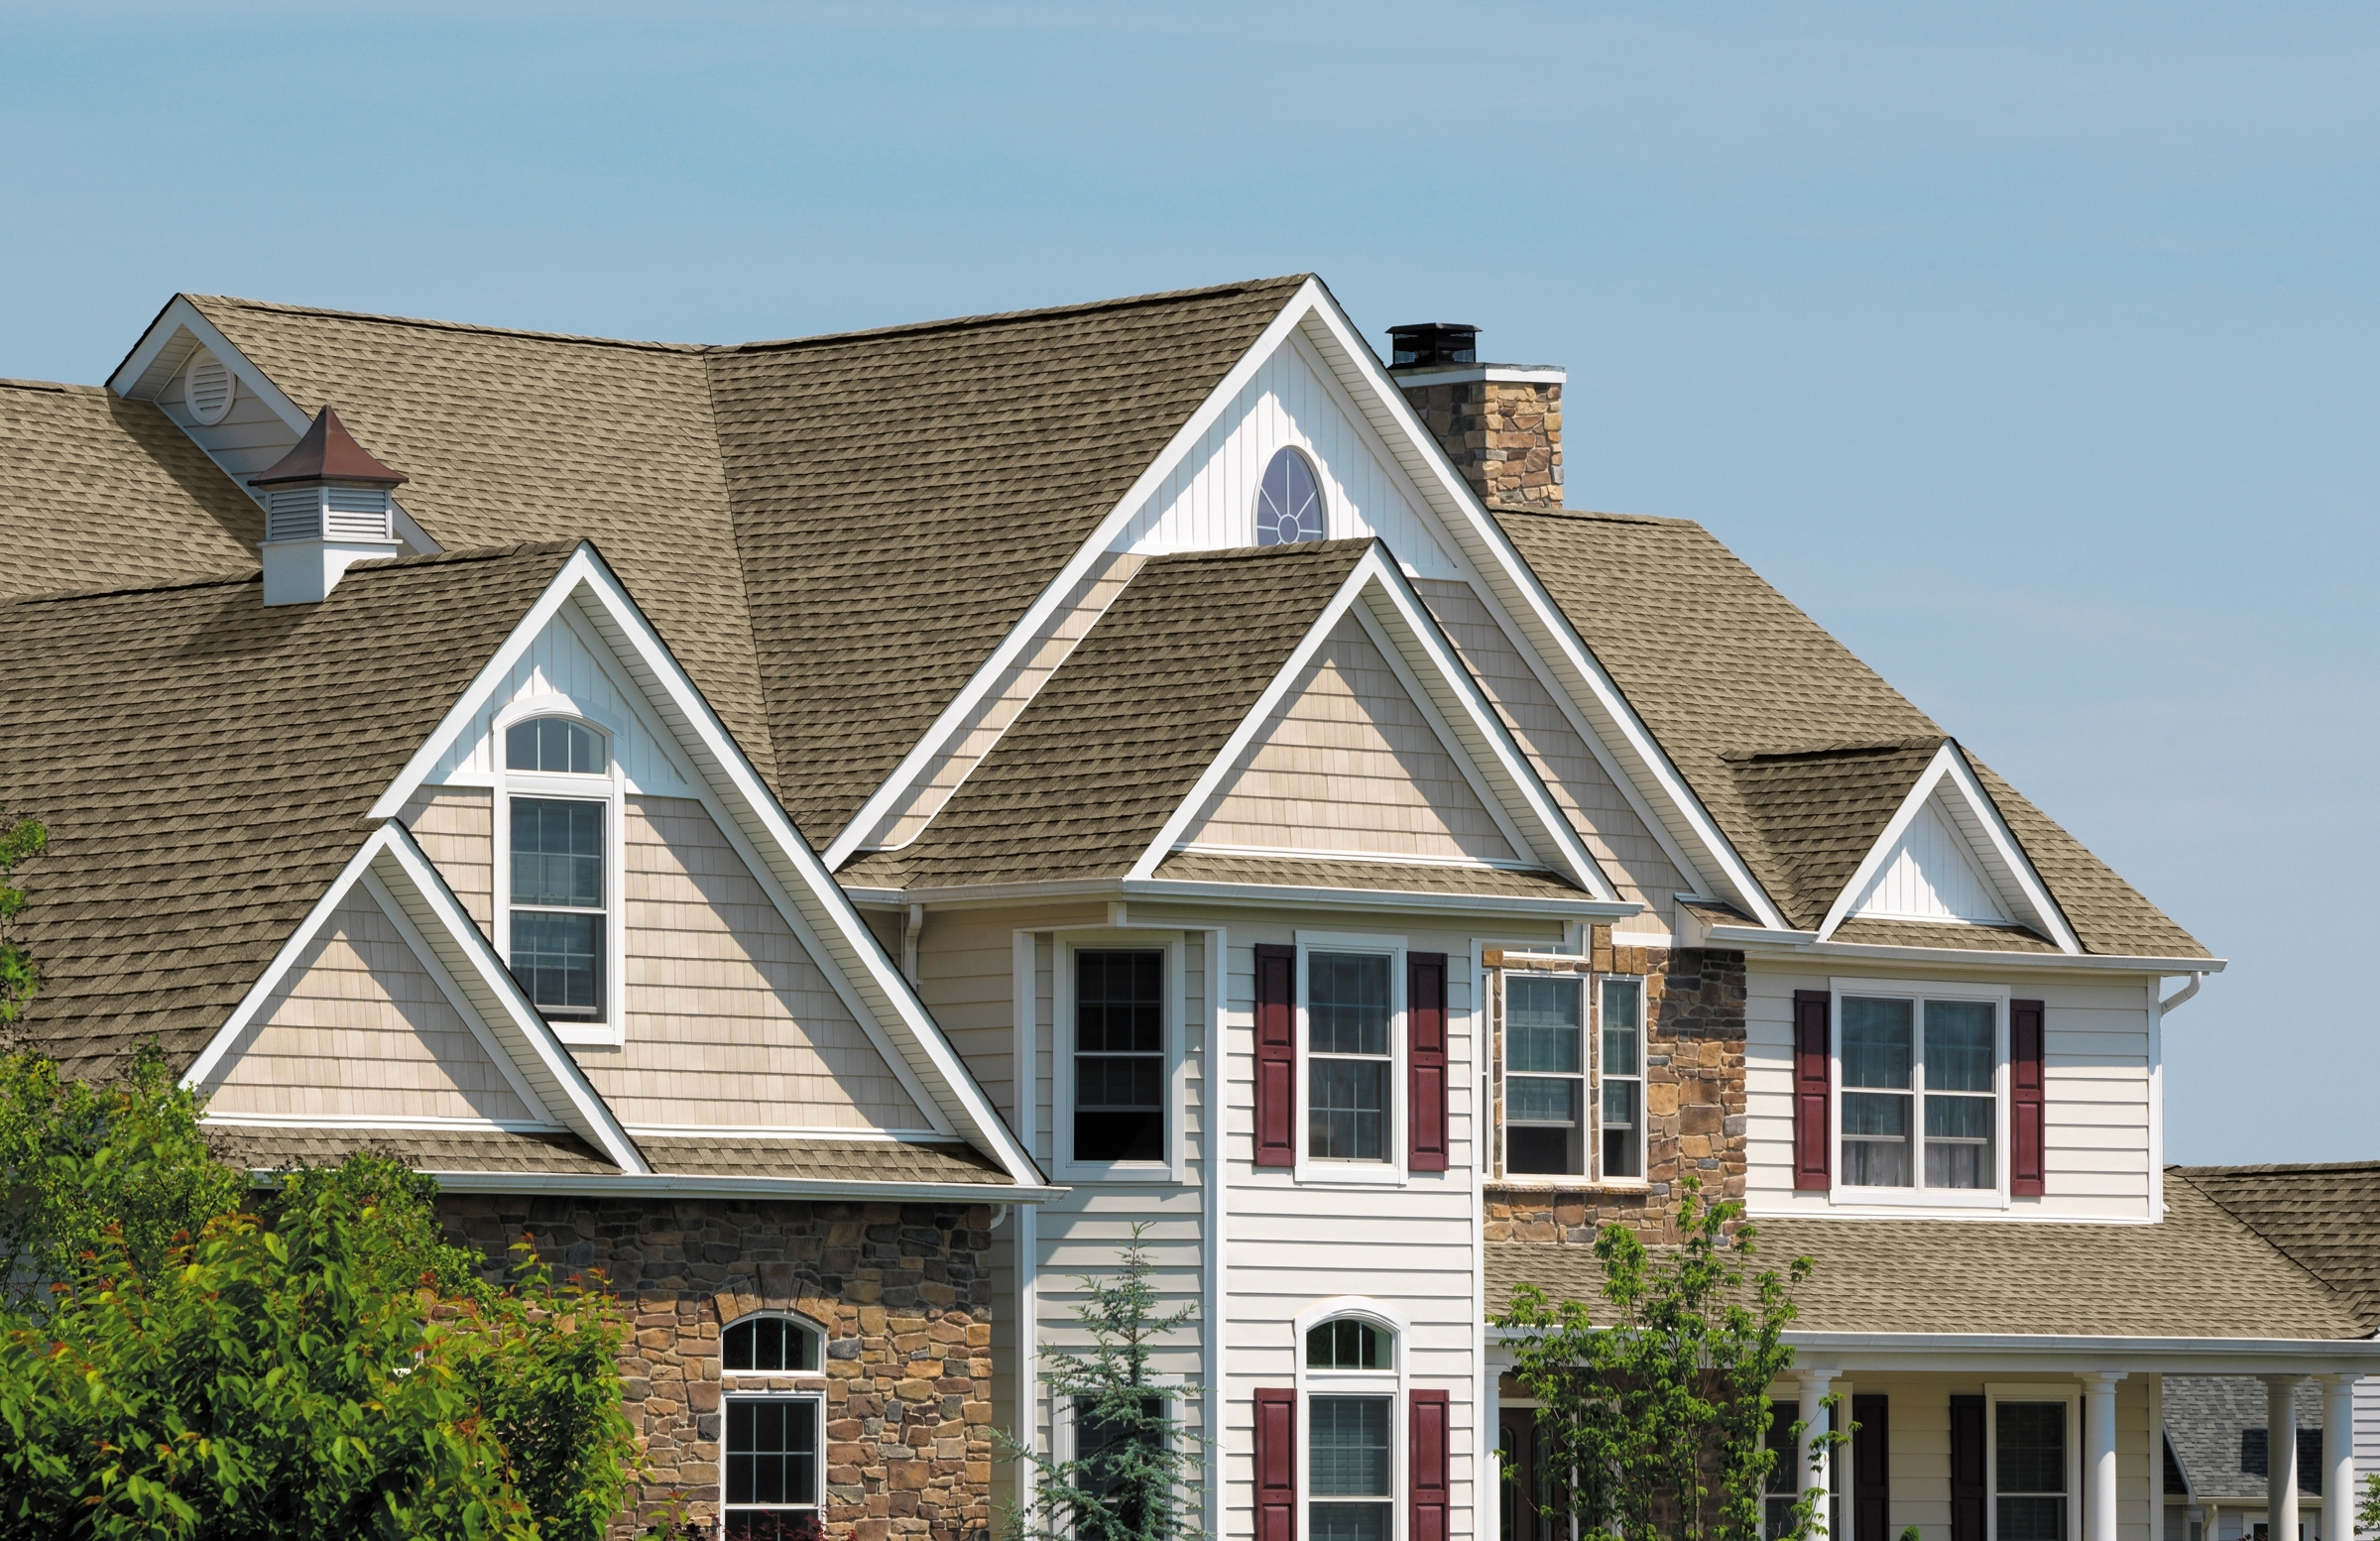 Perfect Pitch Roofing is Long Islands Premier Roofing Company